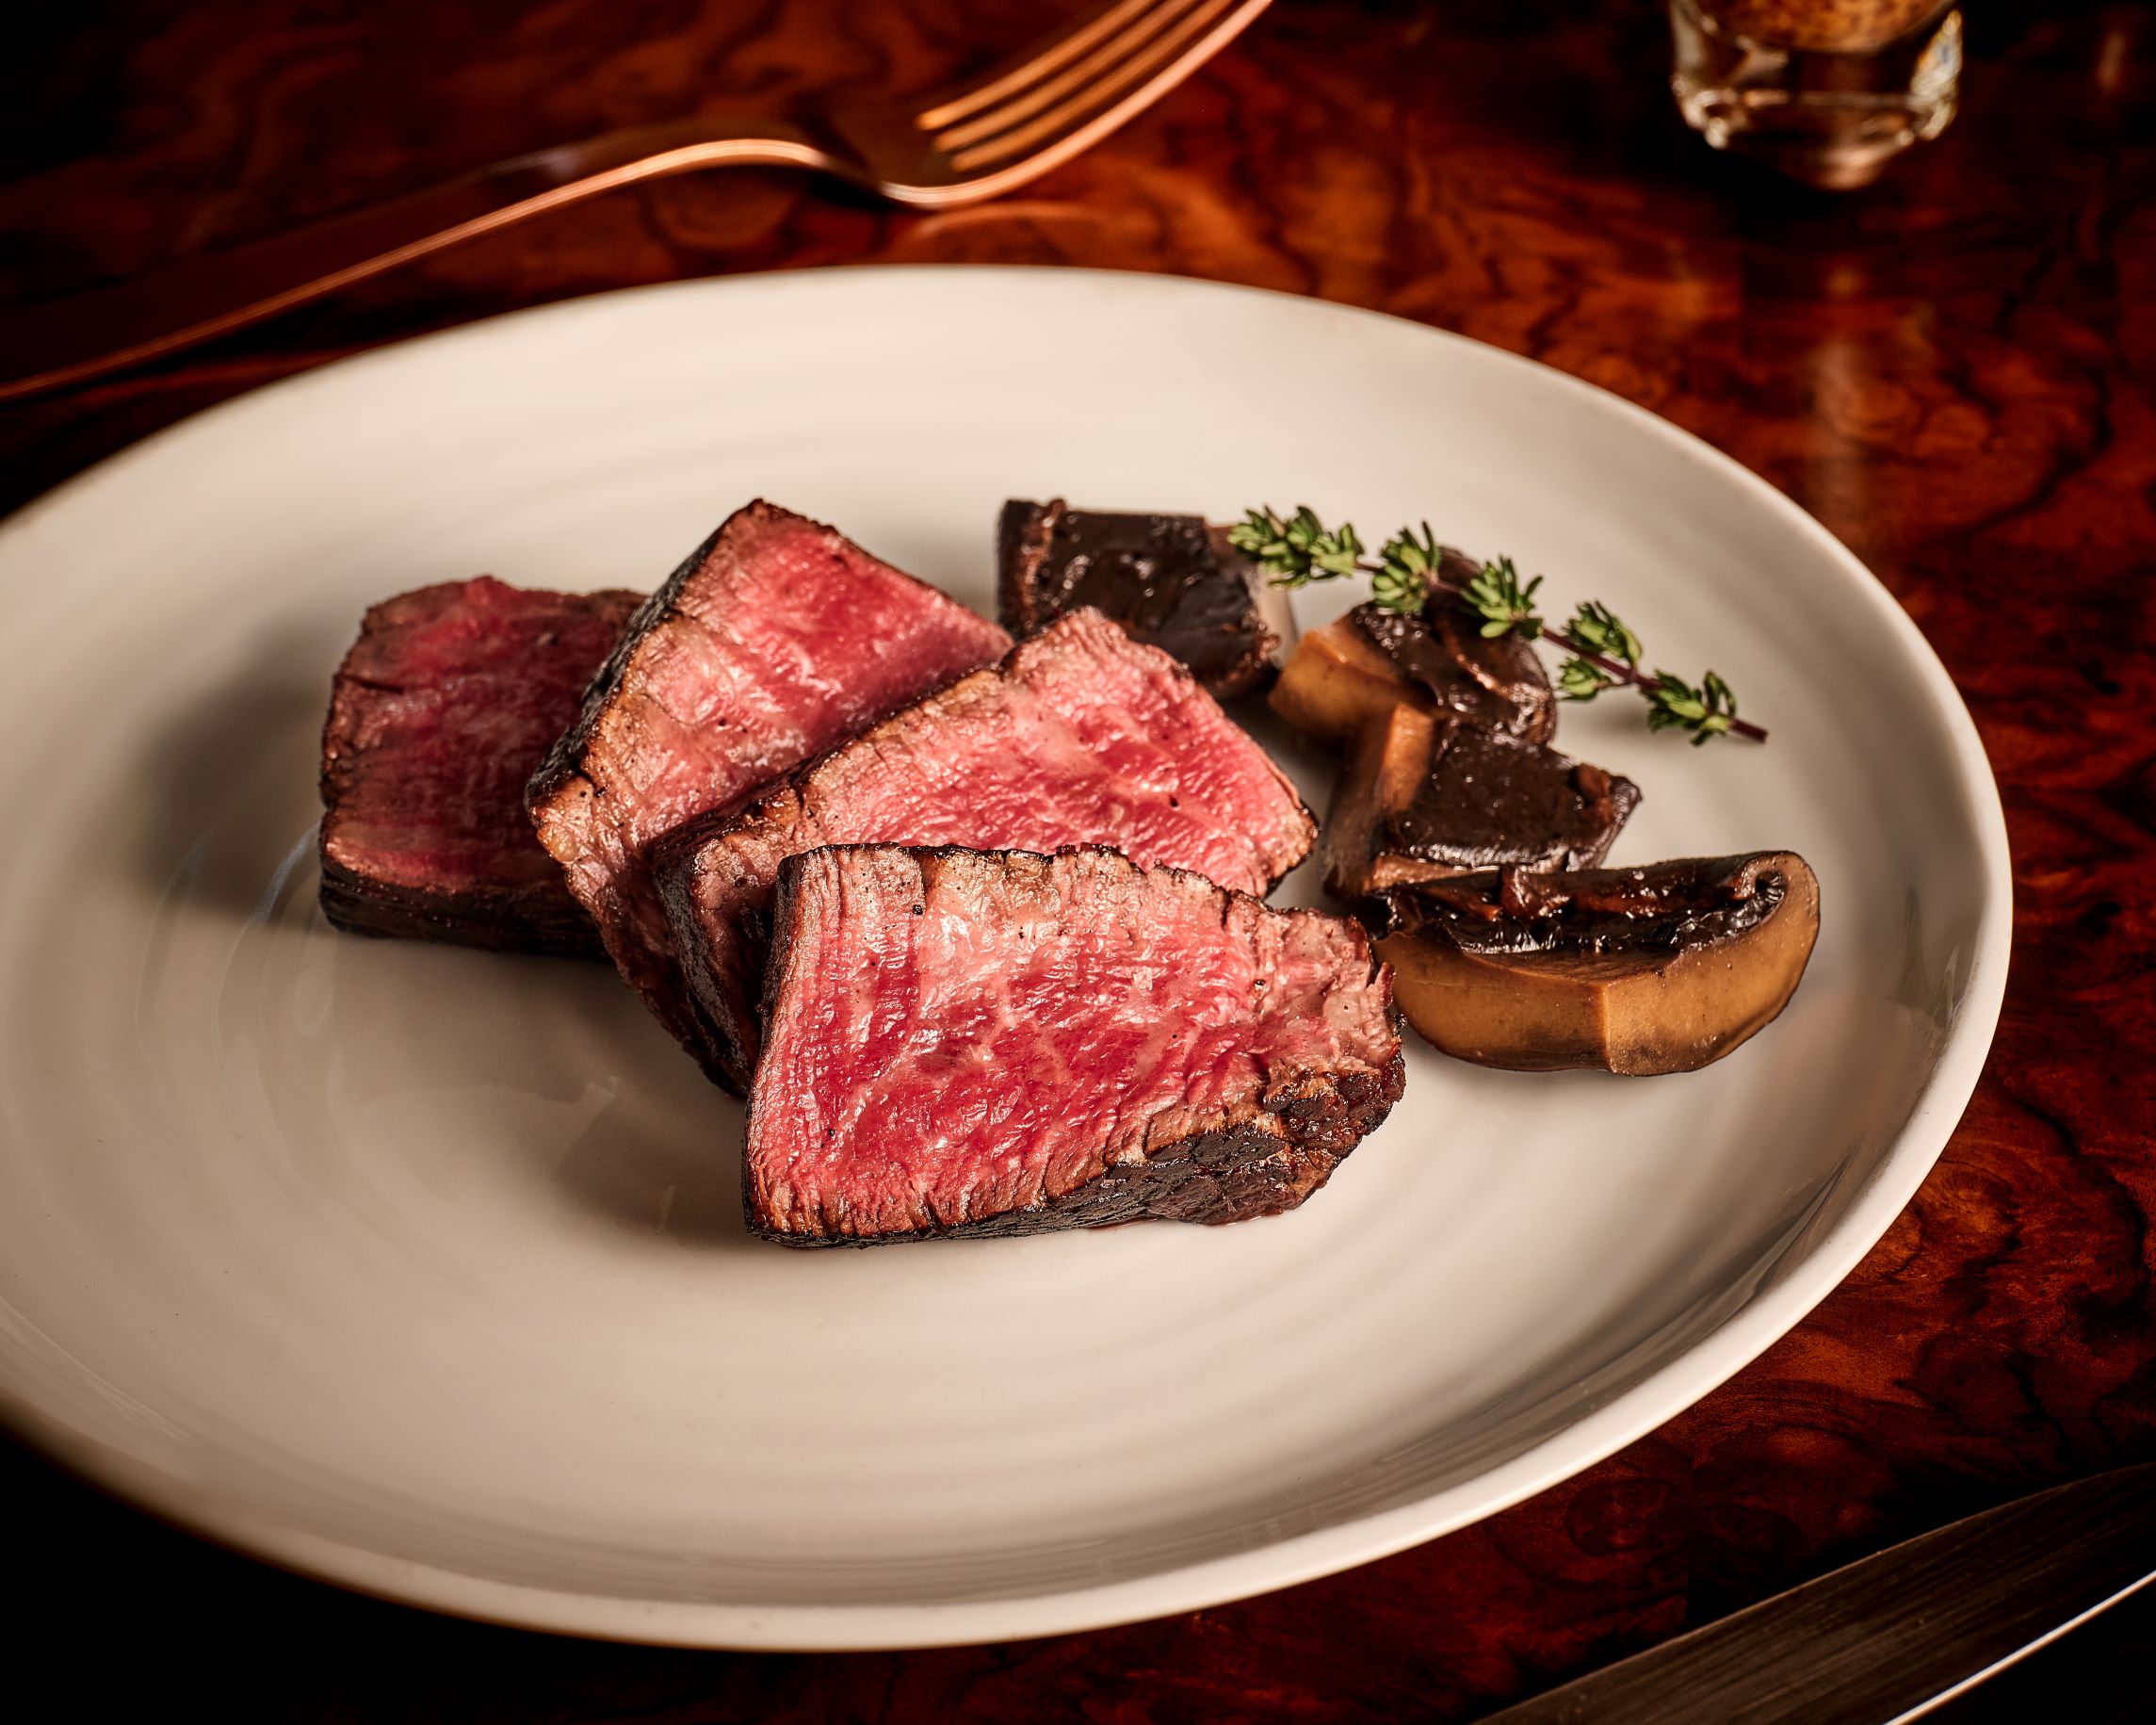 Bull & Bear presents its fresh take on grillroom dishes